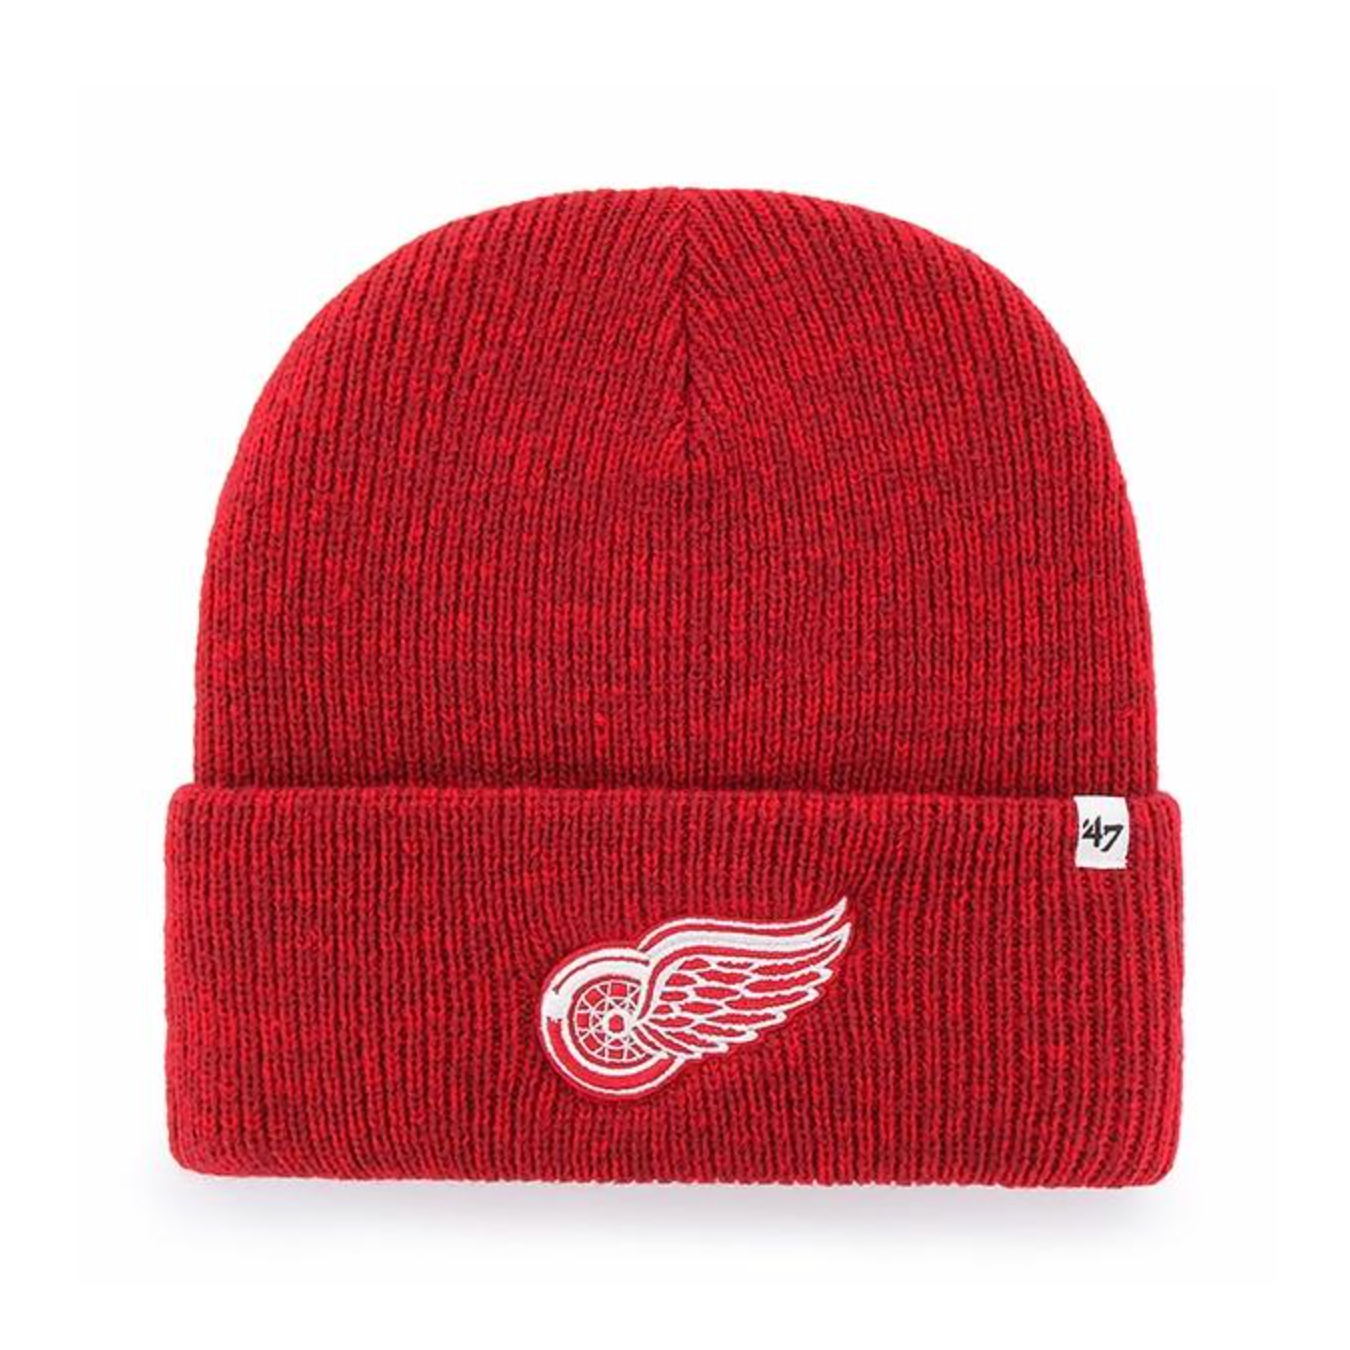 '47 Brand - Detroit Red Wings Knit - Red